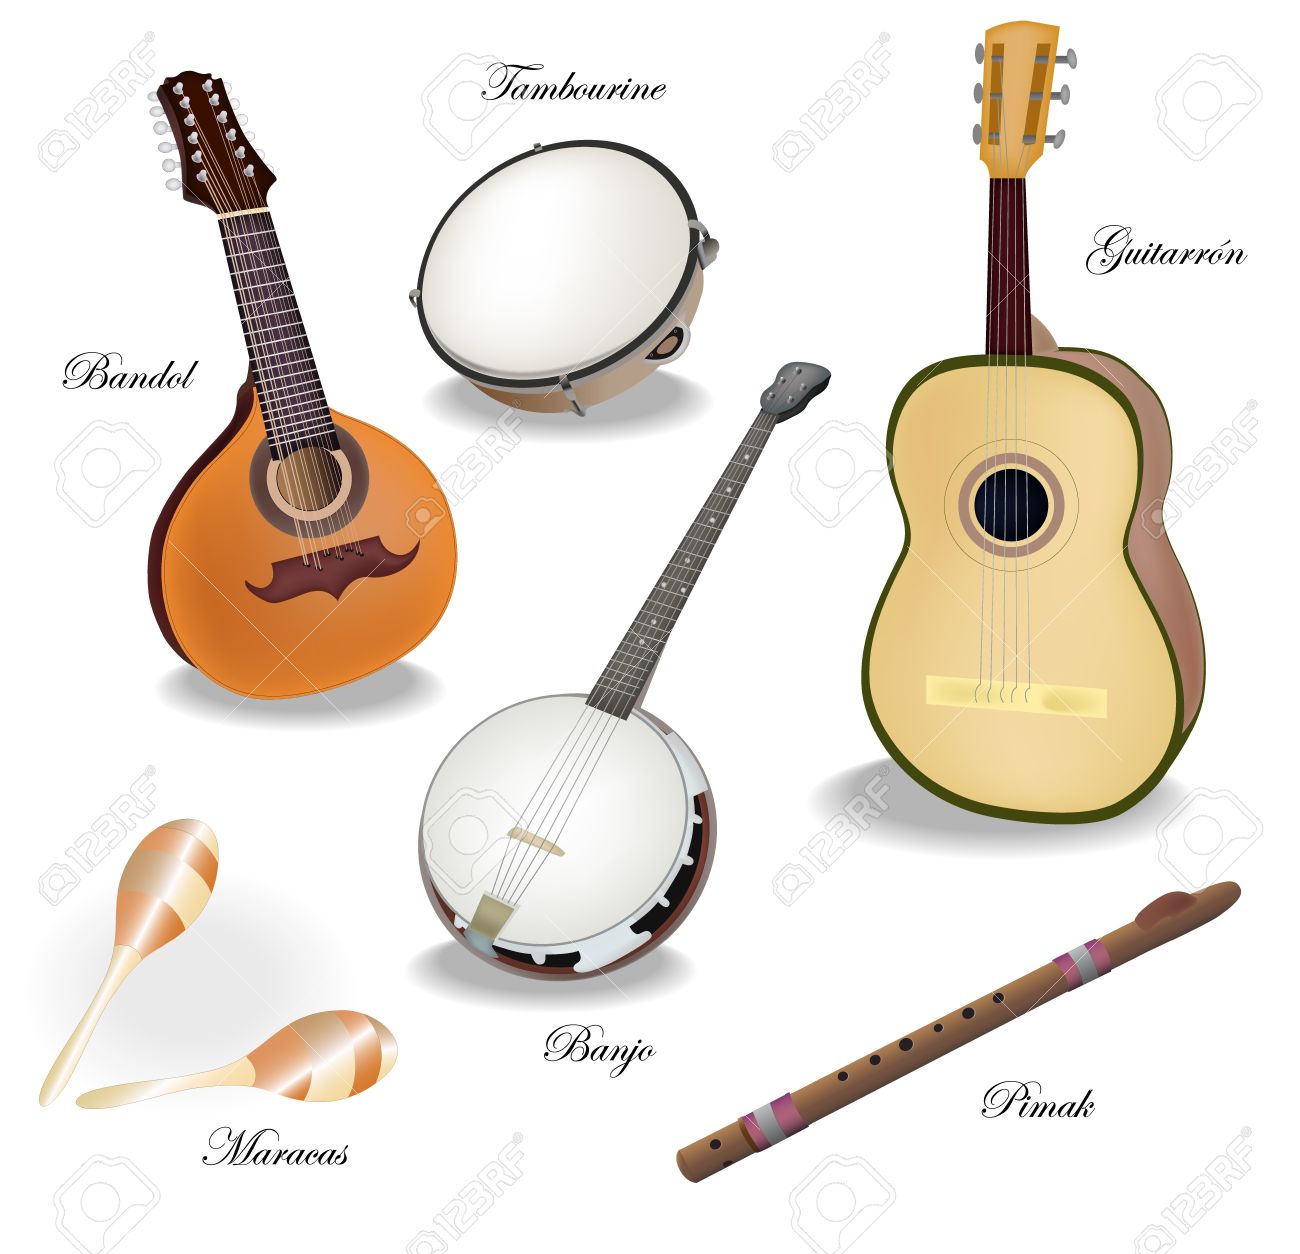 Banjo Stock Photos Images. Royalty Free Banjo Images And Pictures.